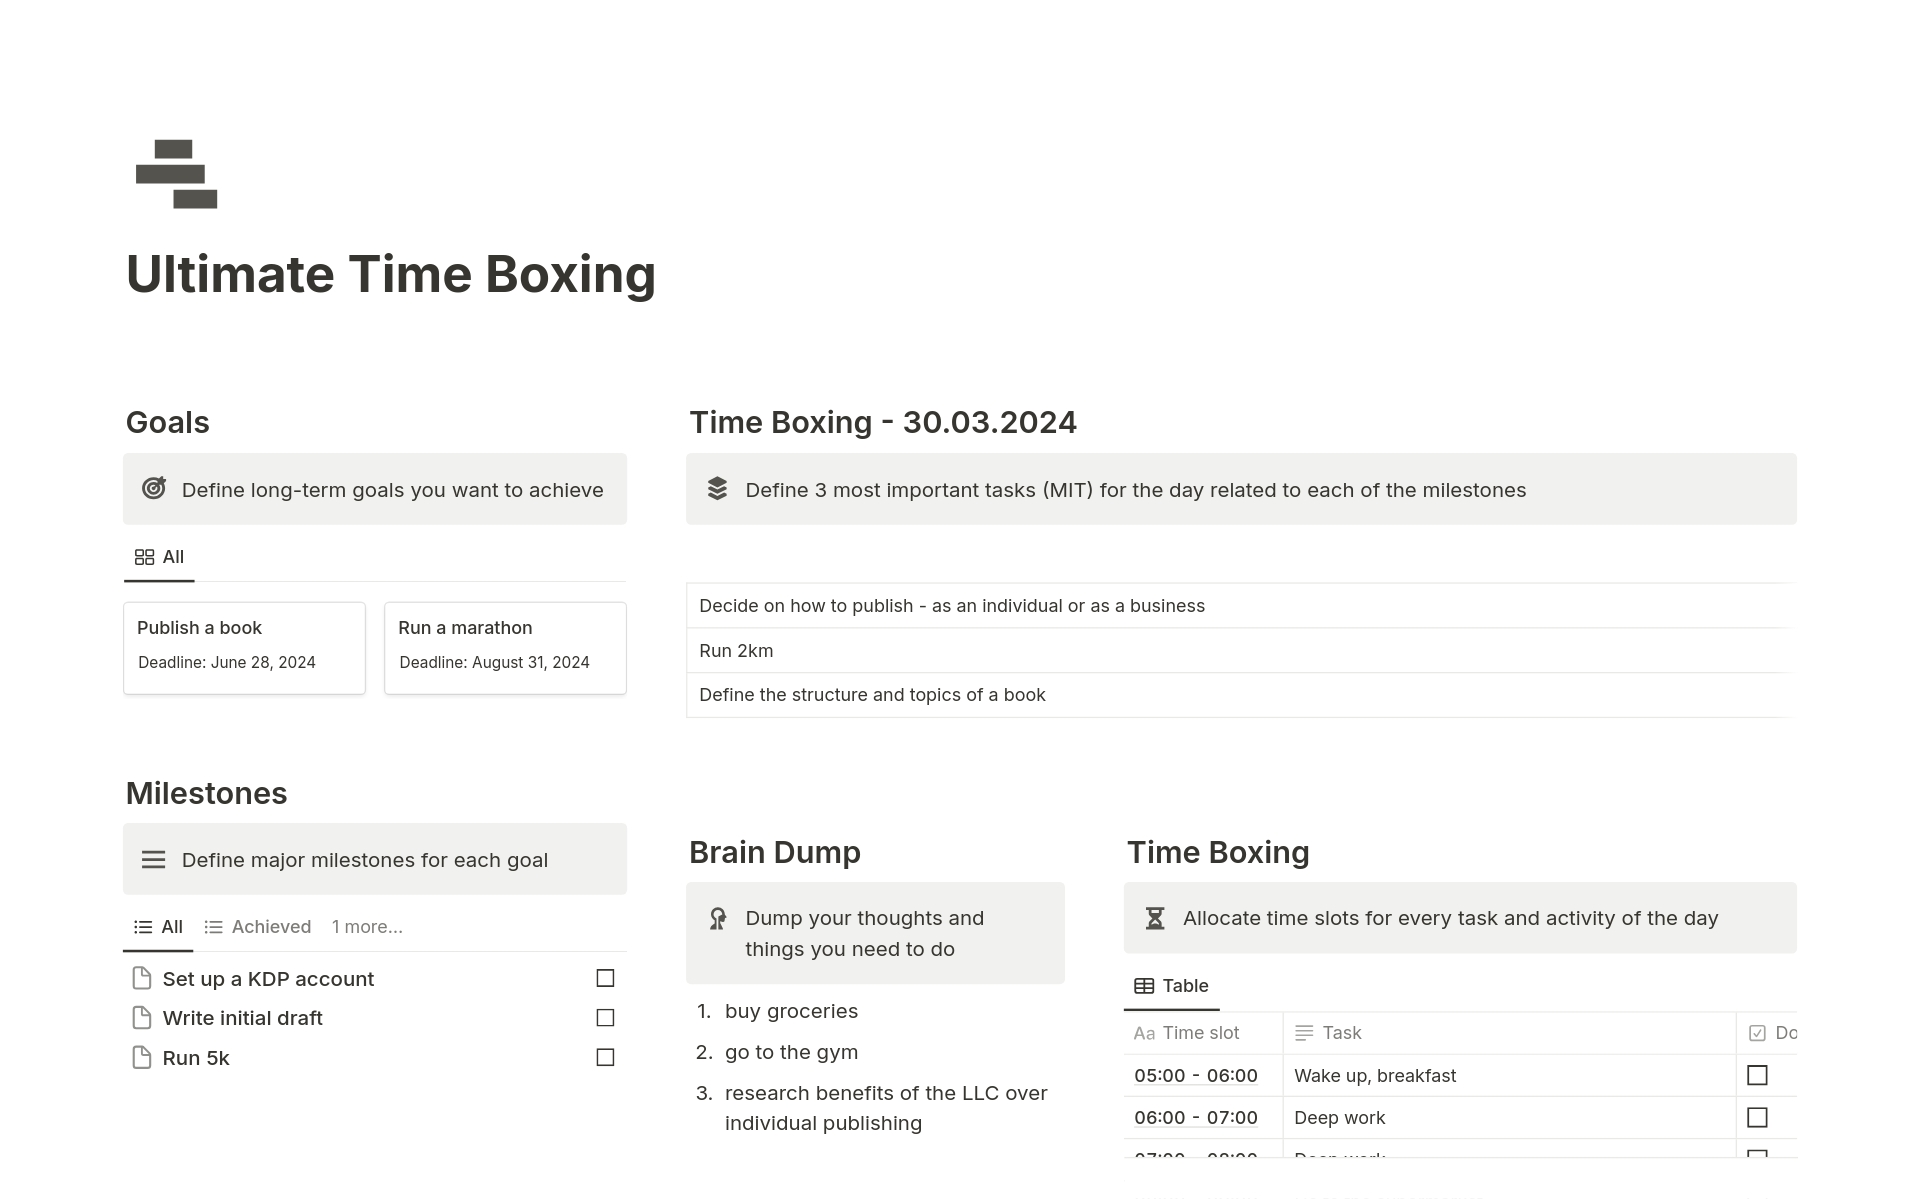 Stop Drowning in Tasks: Take Back Control of Your Time with Ultimate Time Boxing in Notion!
Do you feel like there just aren't enough hours in the day? 
Are your to-do lists getting longer, not shorter?
Ditch the overwhelm with the Ultimate Time Boxing Notion Template!